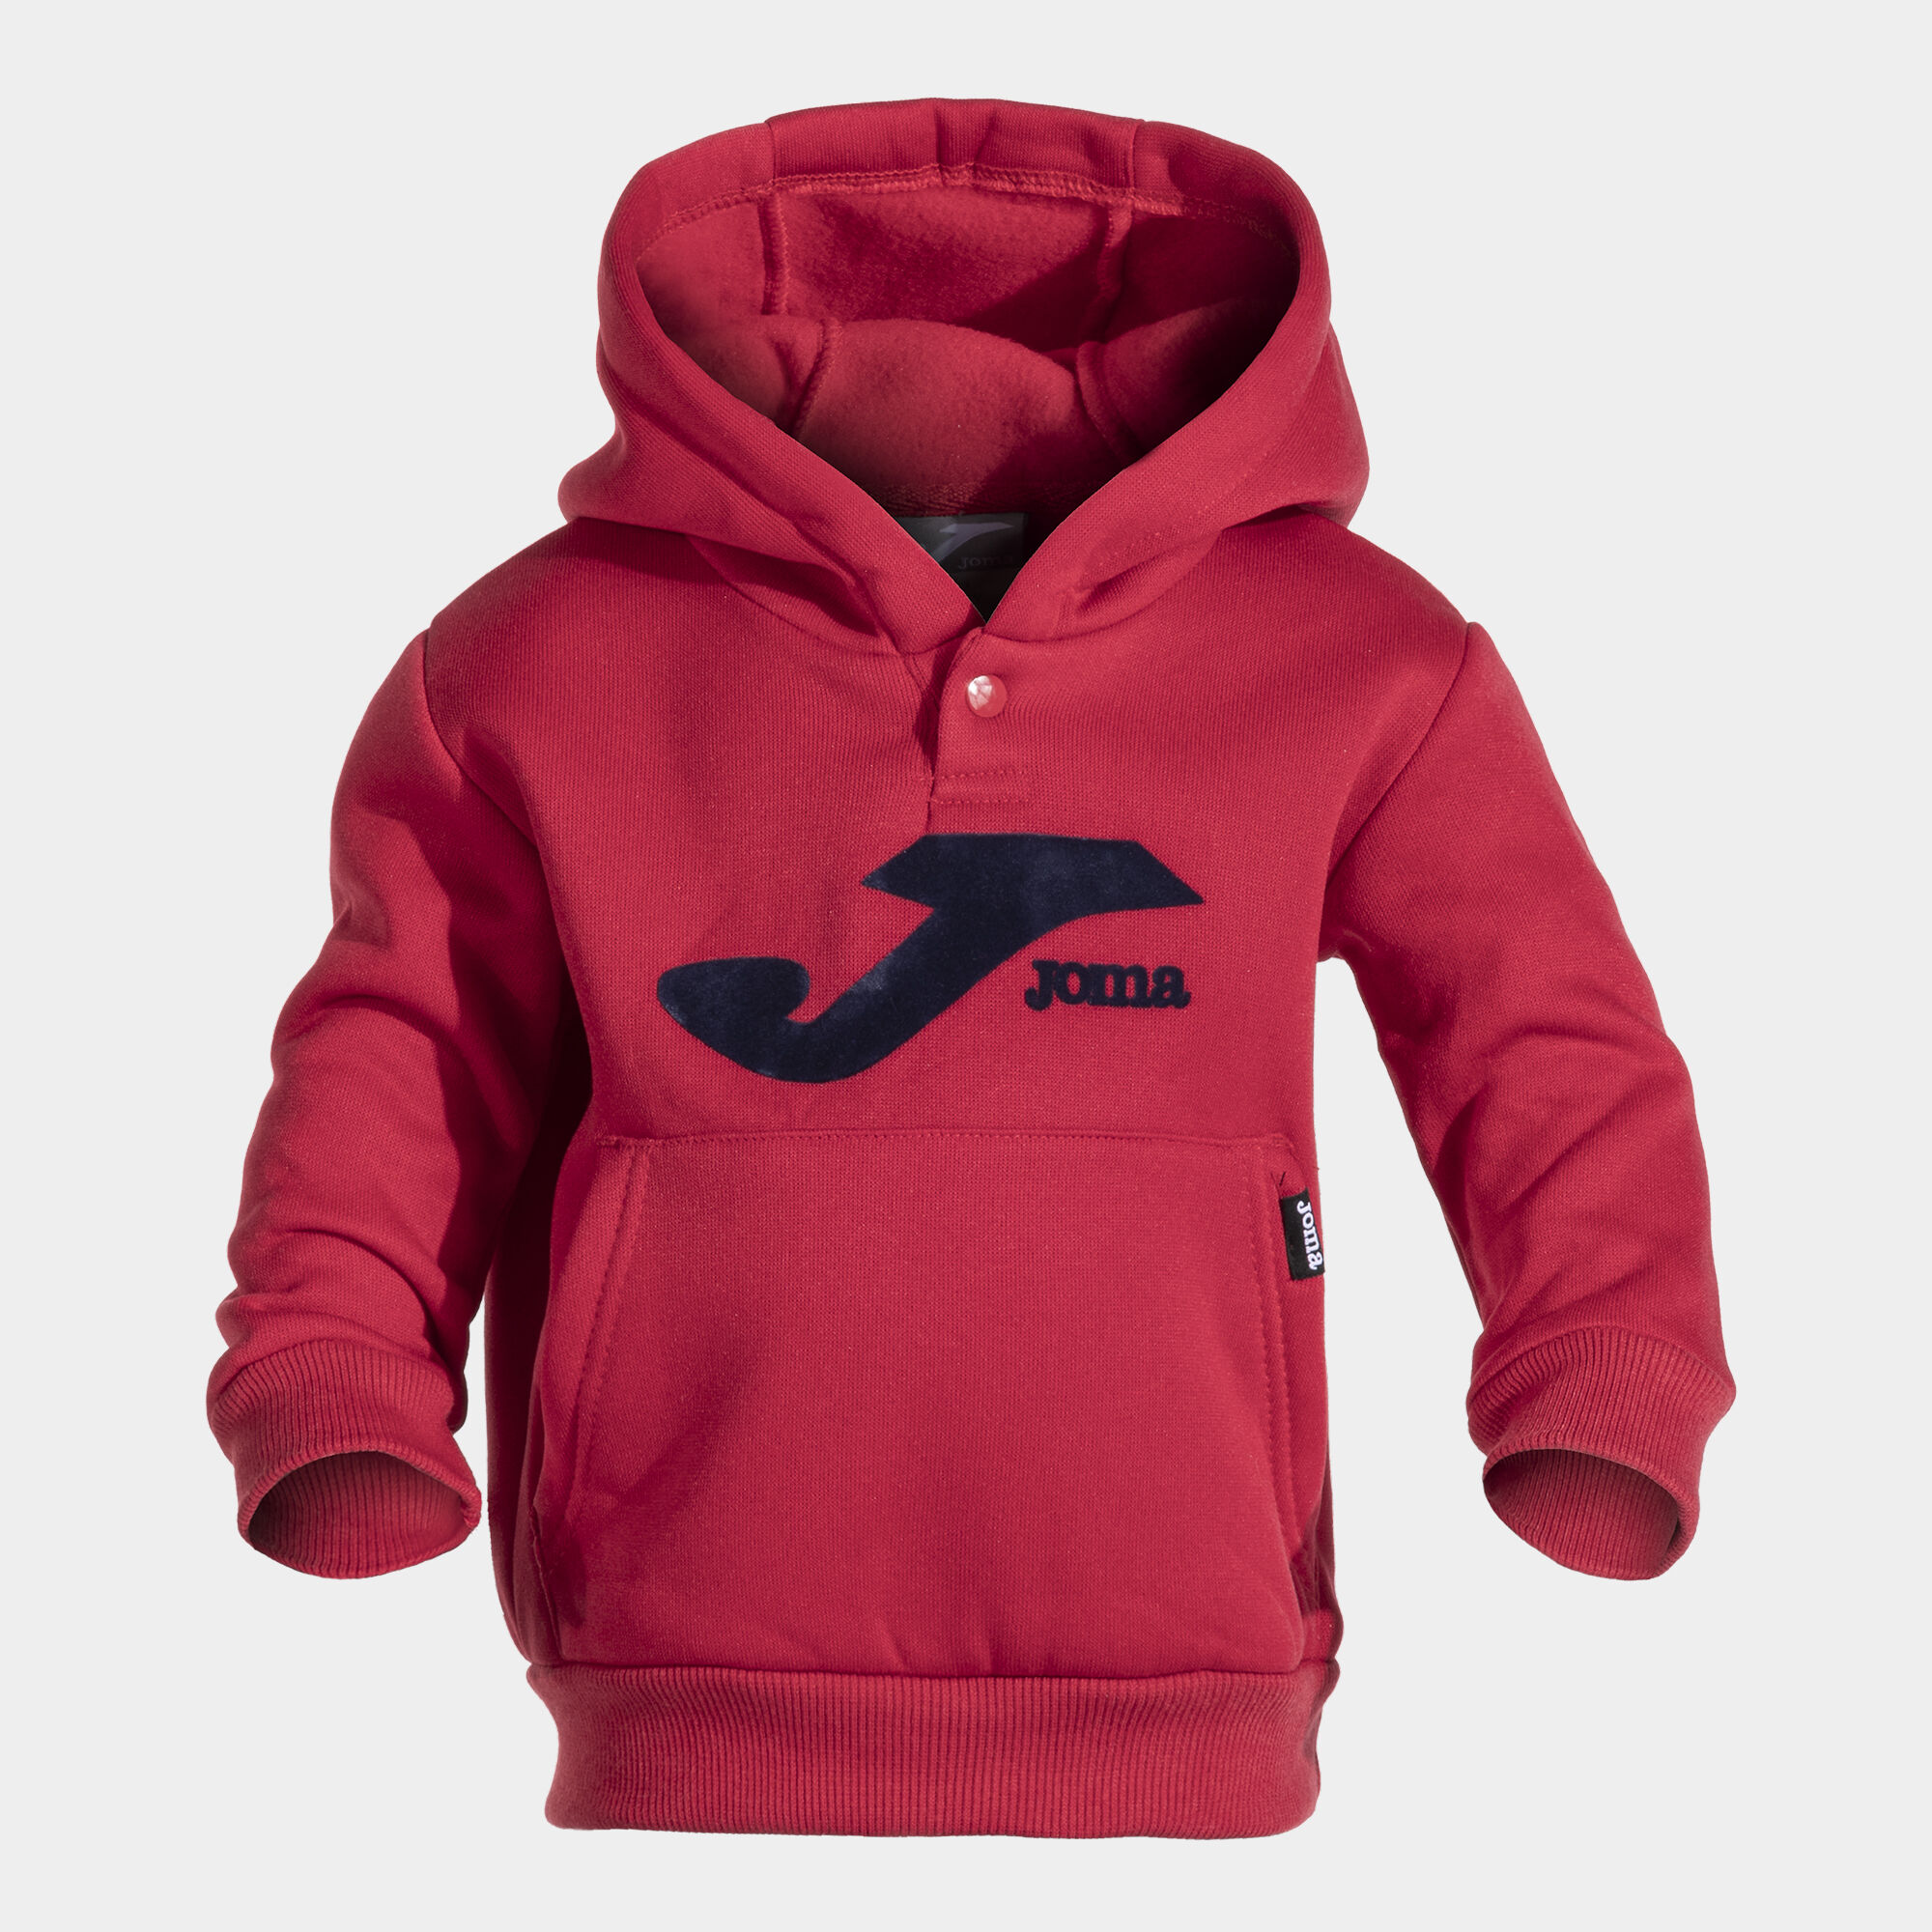 Hooded sweater junior Lion red